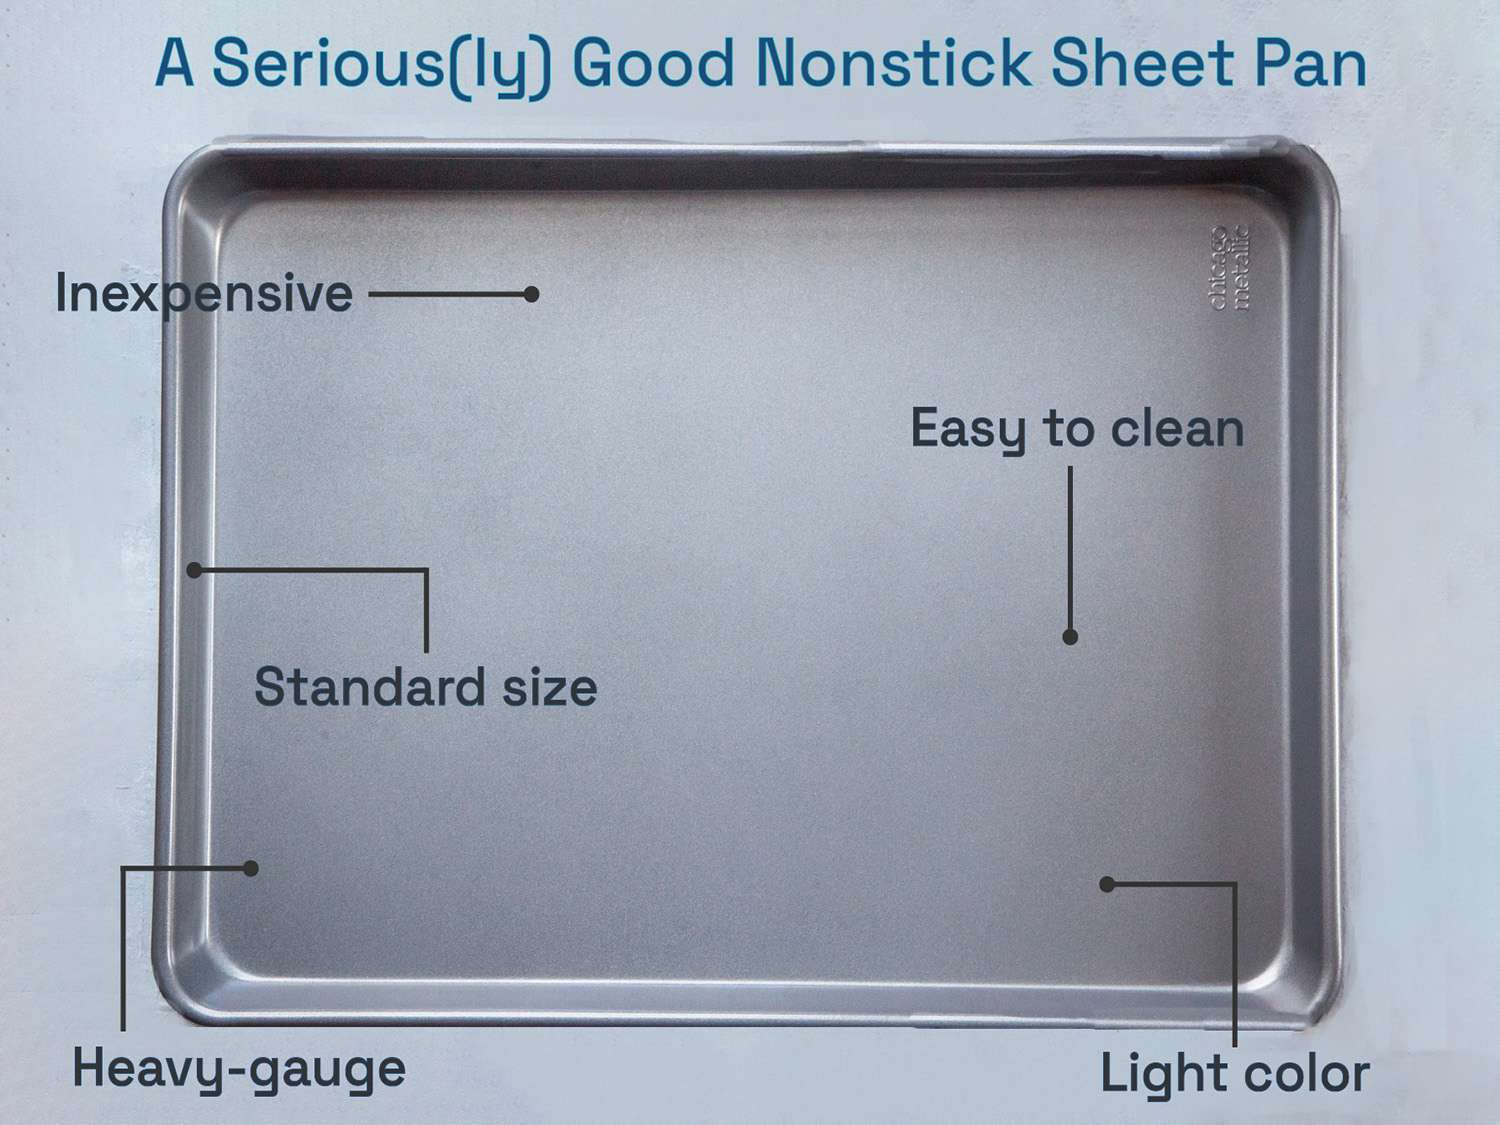 a seriously good nonstick sheet pan: inexpensive, heavy-gauge, easy to clean, light color, inexpensive